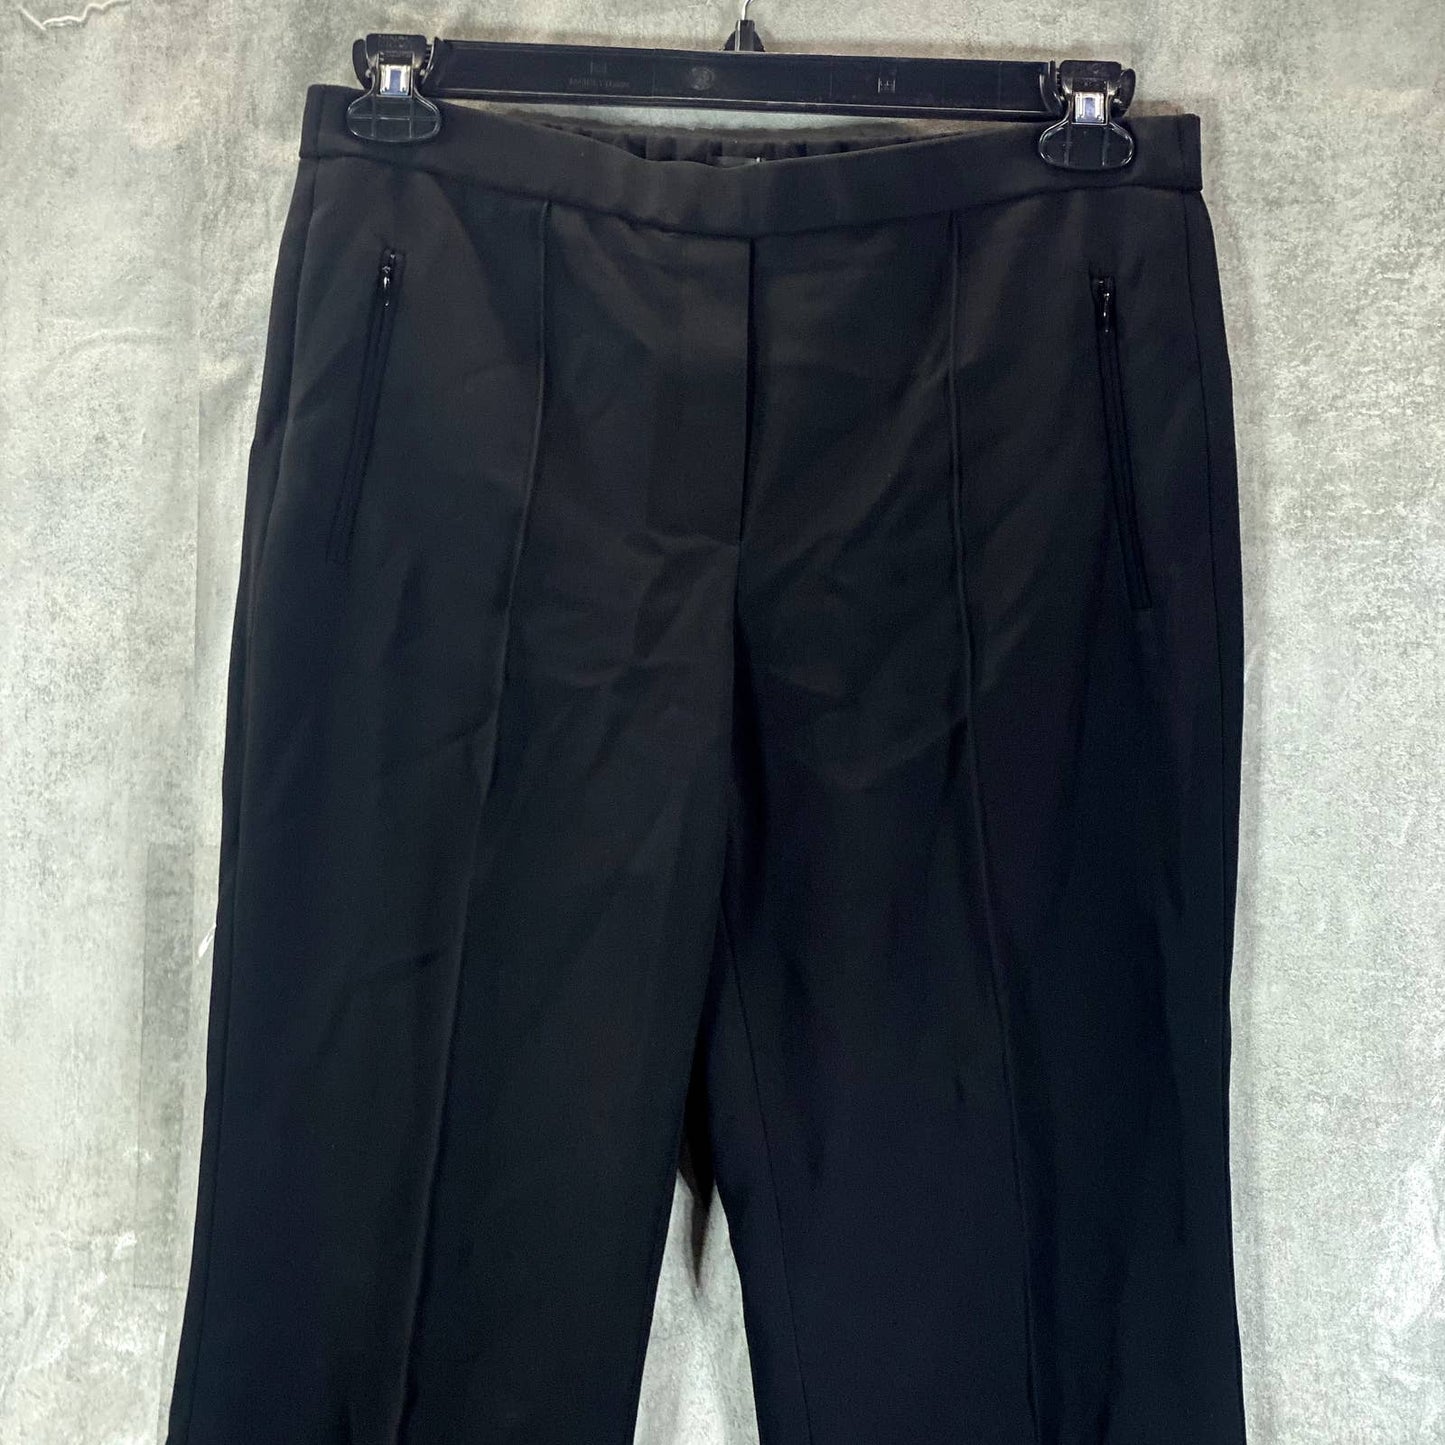 THEORY Women's Black Admiral Crepe Mid-Rise Demitria Pull-On Wide-Leg Pants SZ 8